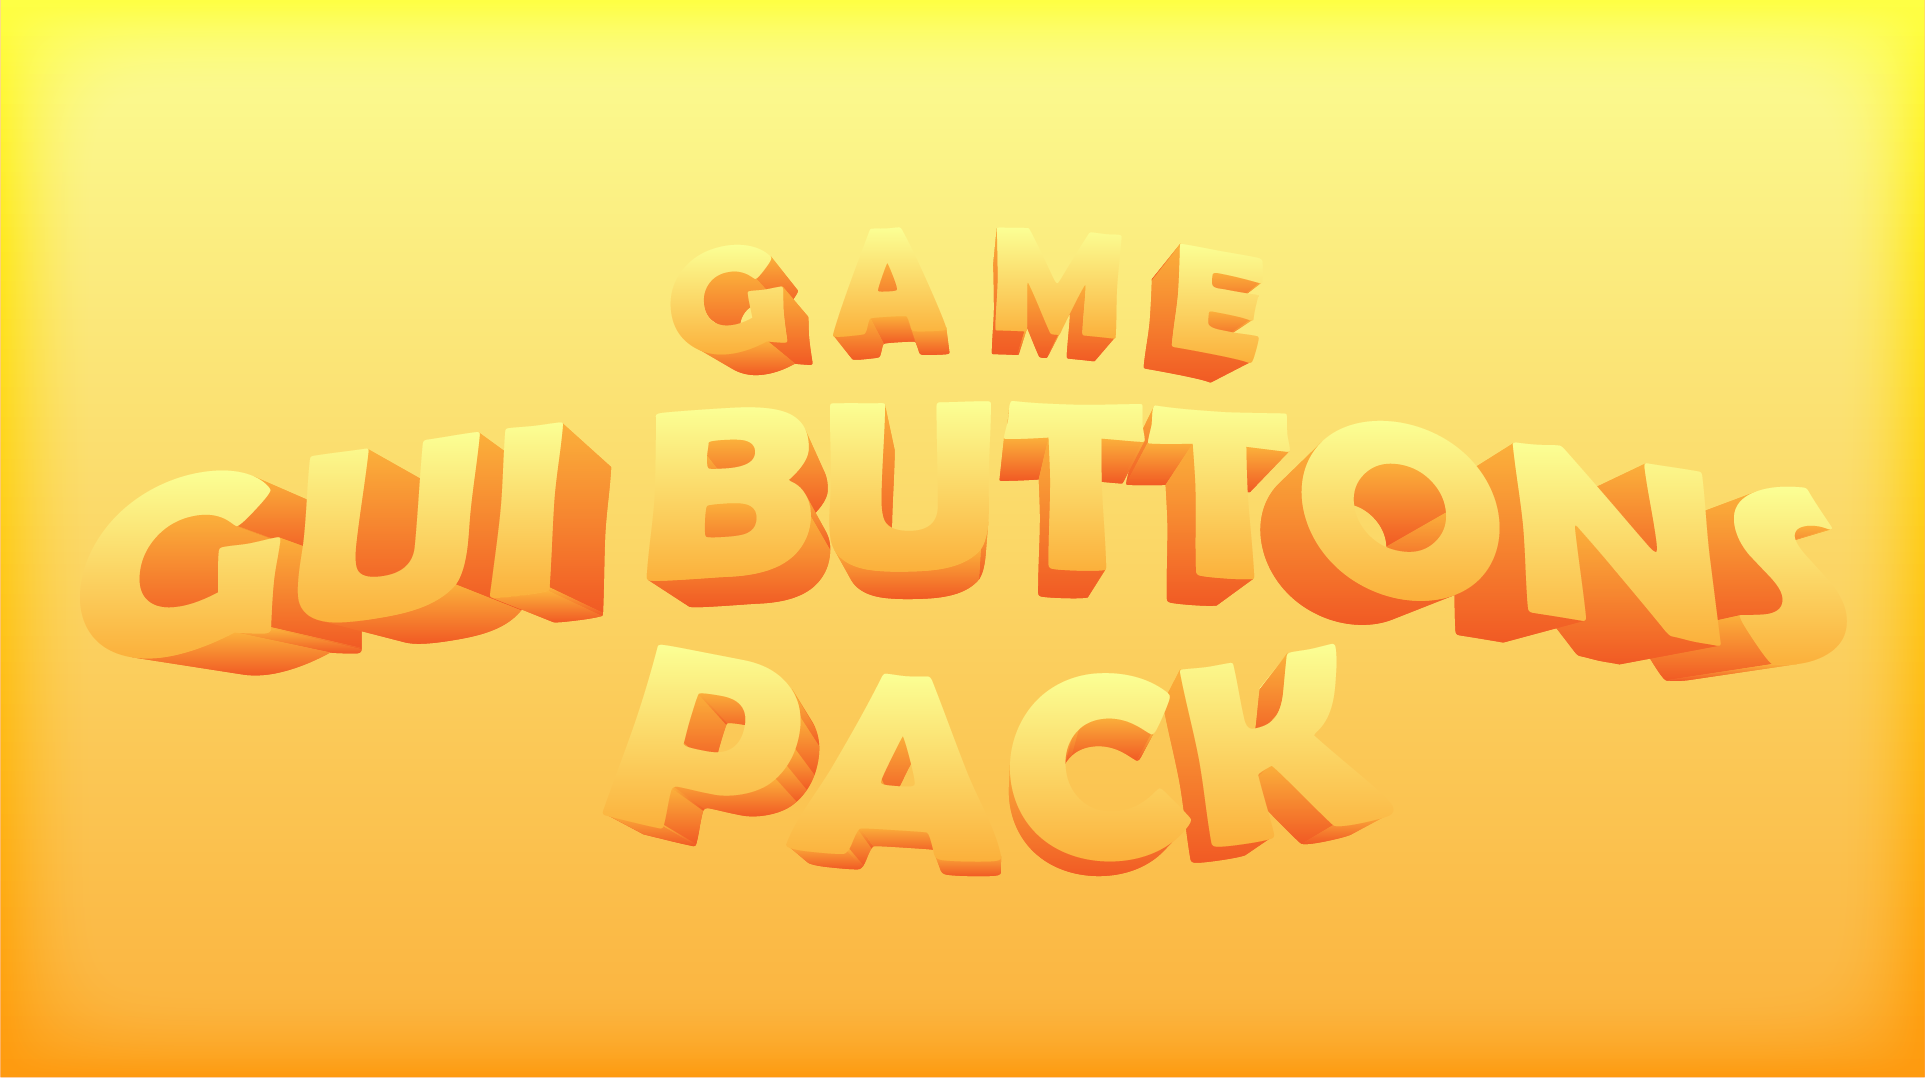 Simple GUI Buttons Pack